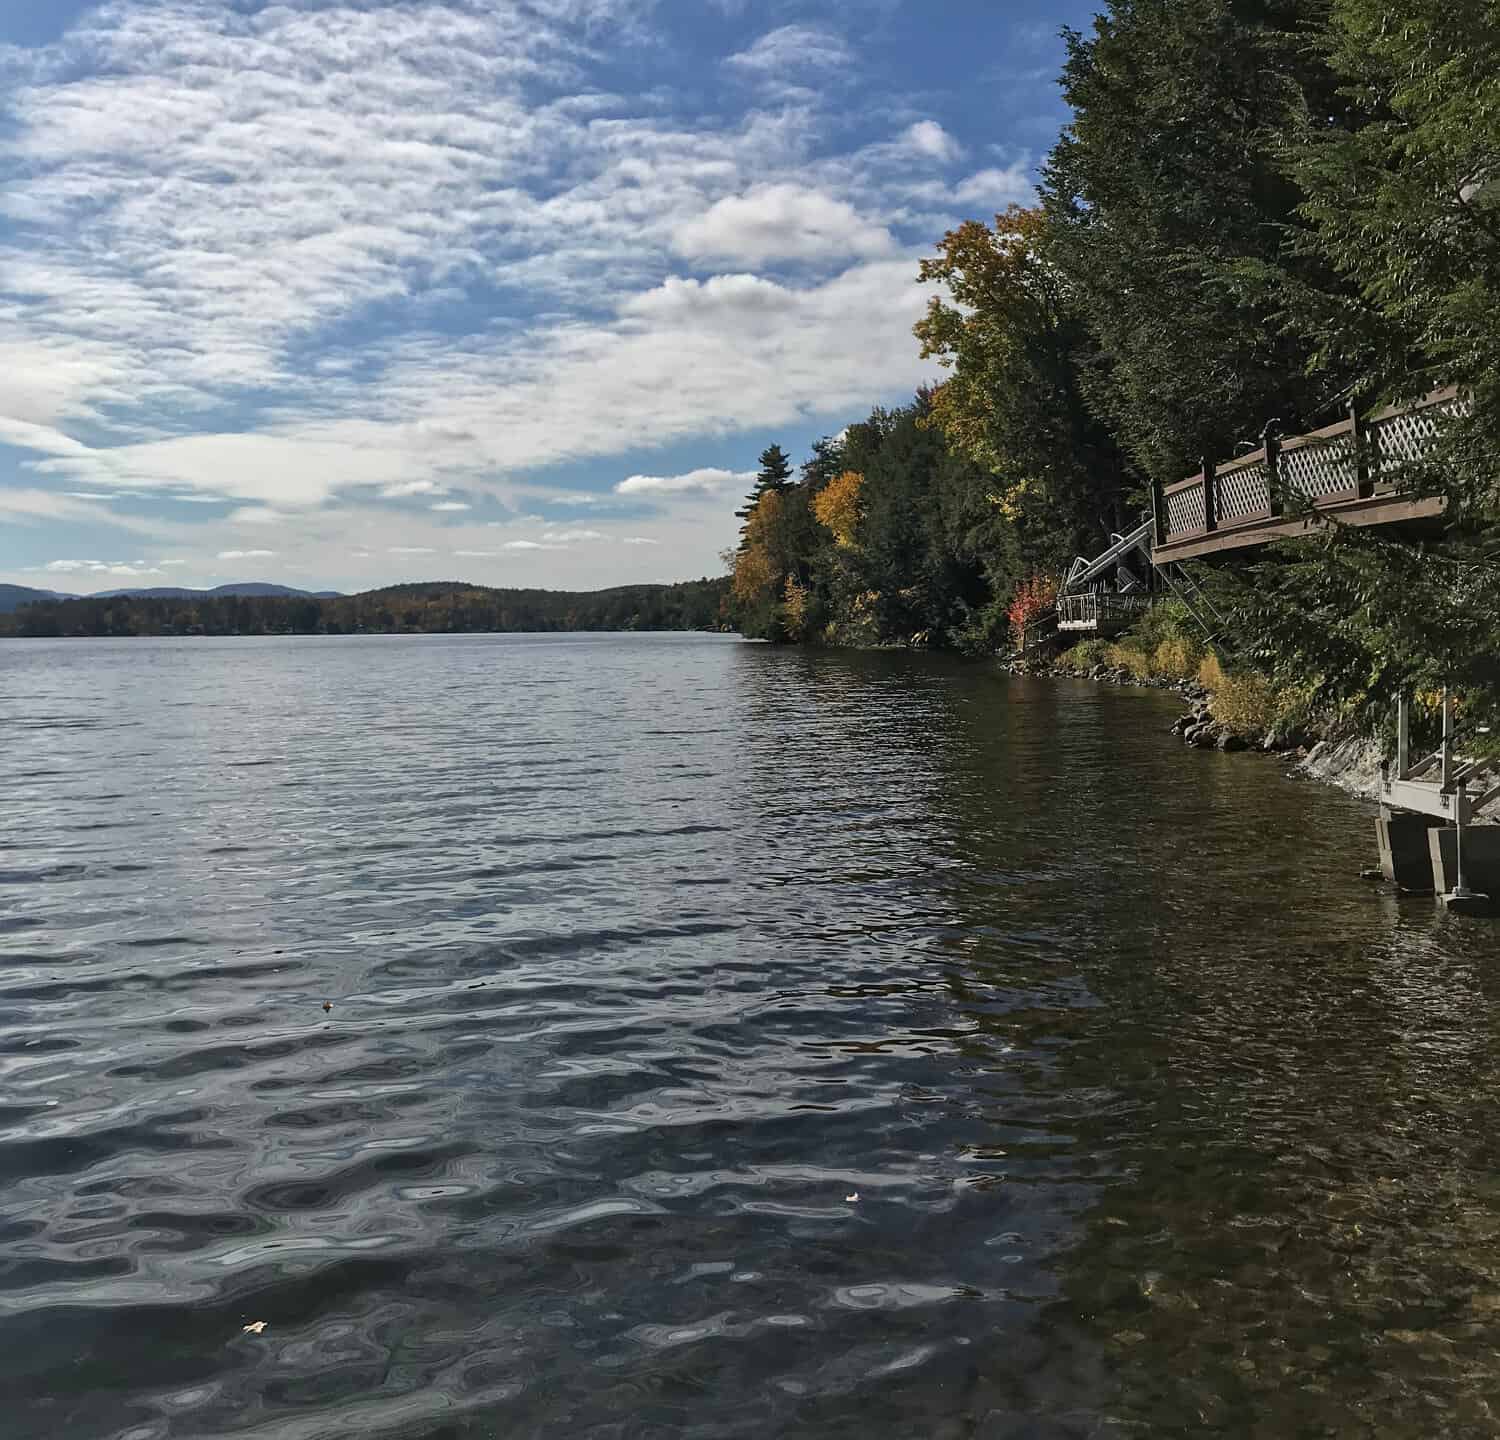 View from a lake house in Vermont. The fluffy clouds reflect on Lake Saint Catherine on a breezy fall day.